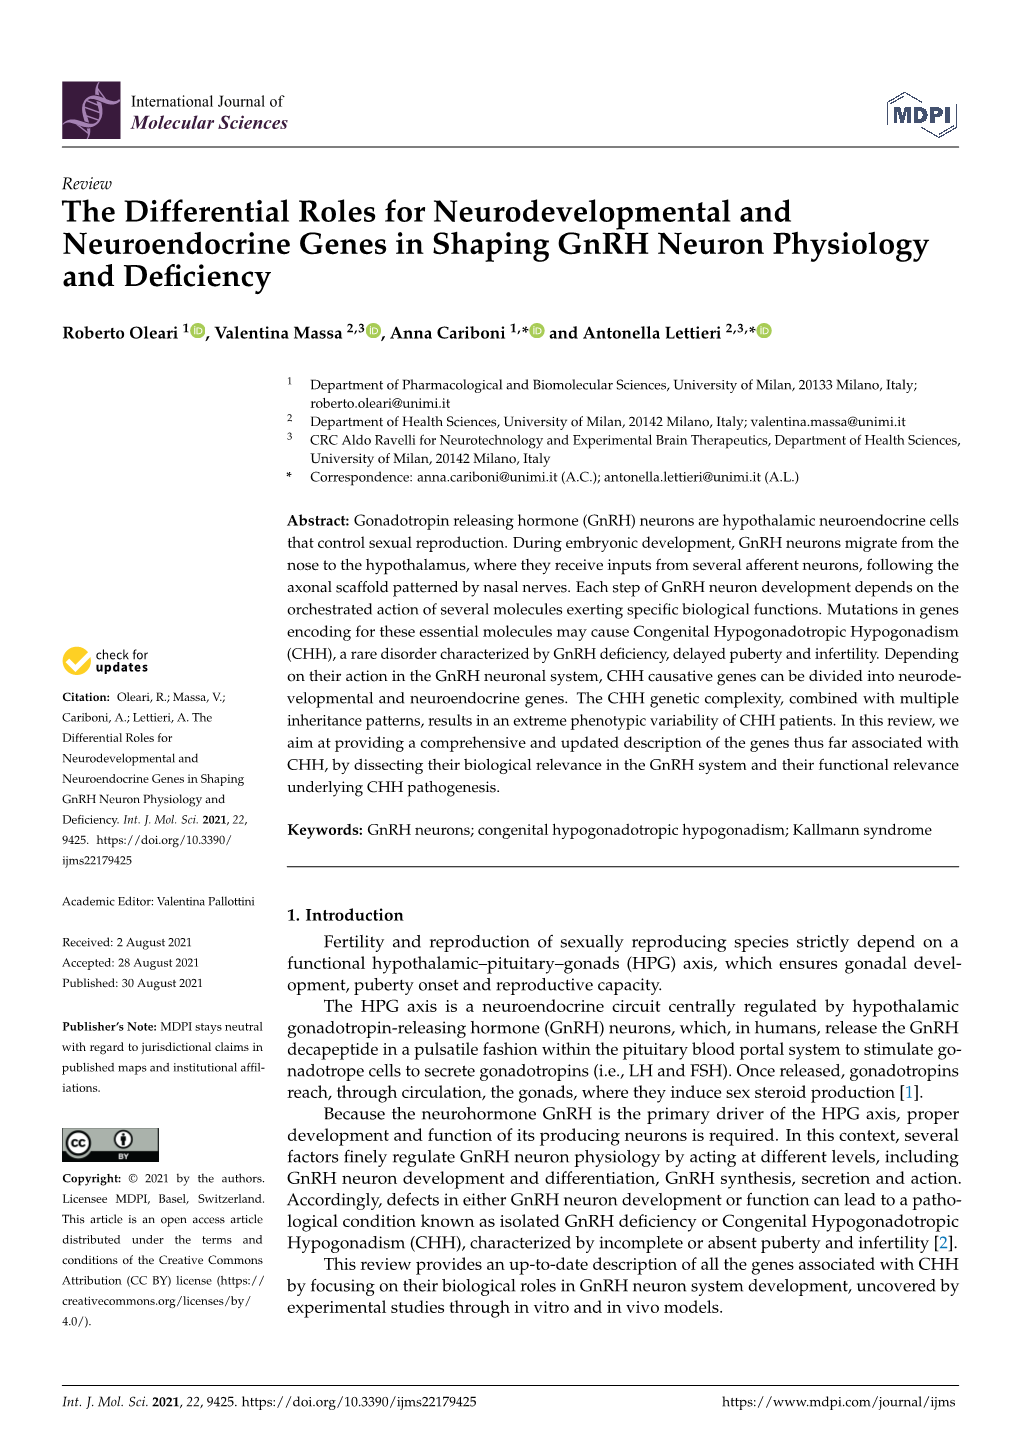 The Differential Roles for Neurodevelopmental and Neuroendocrine Genes in Shaping Gnrh Neuron Physiology and Deficiency